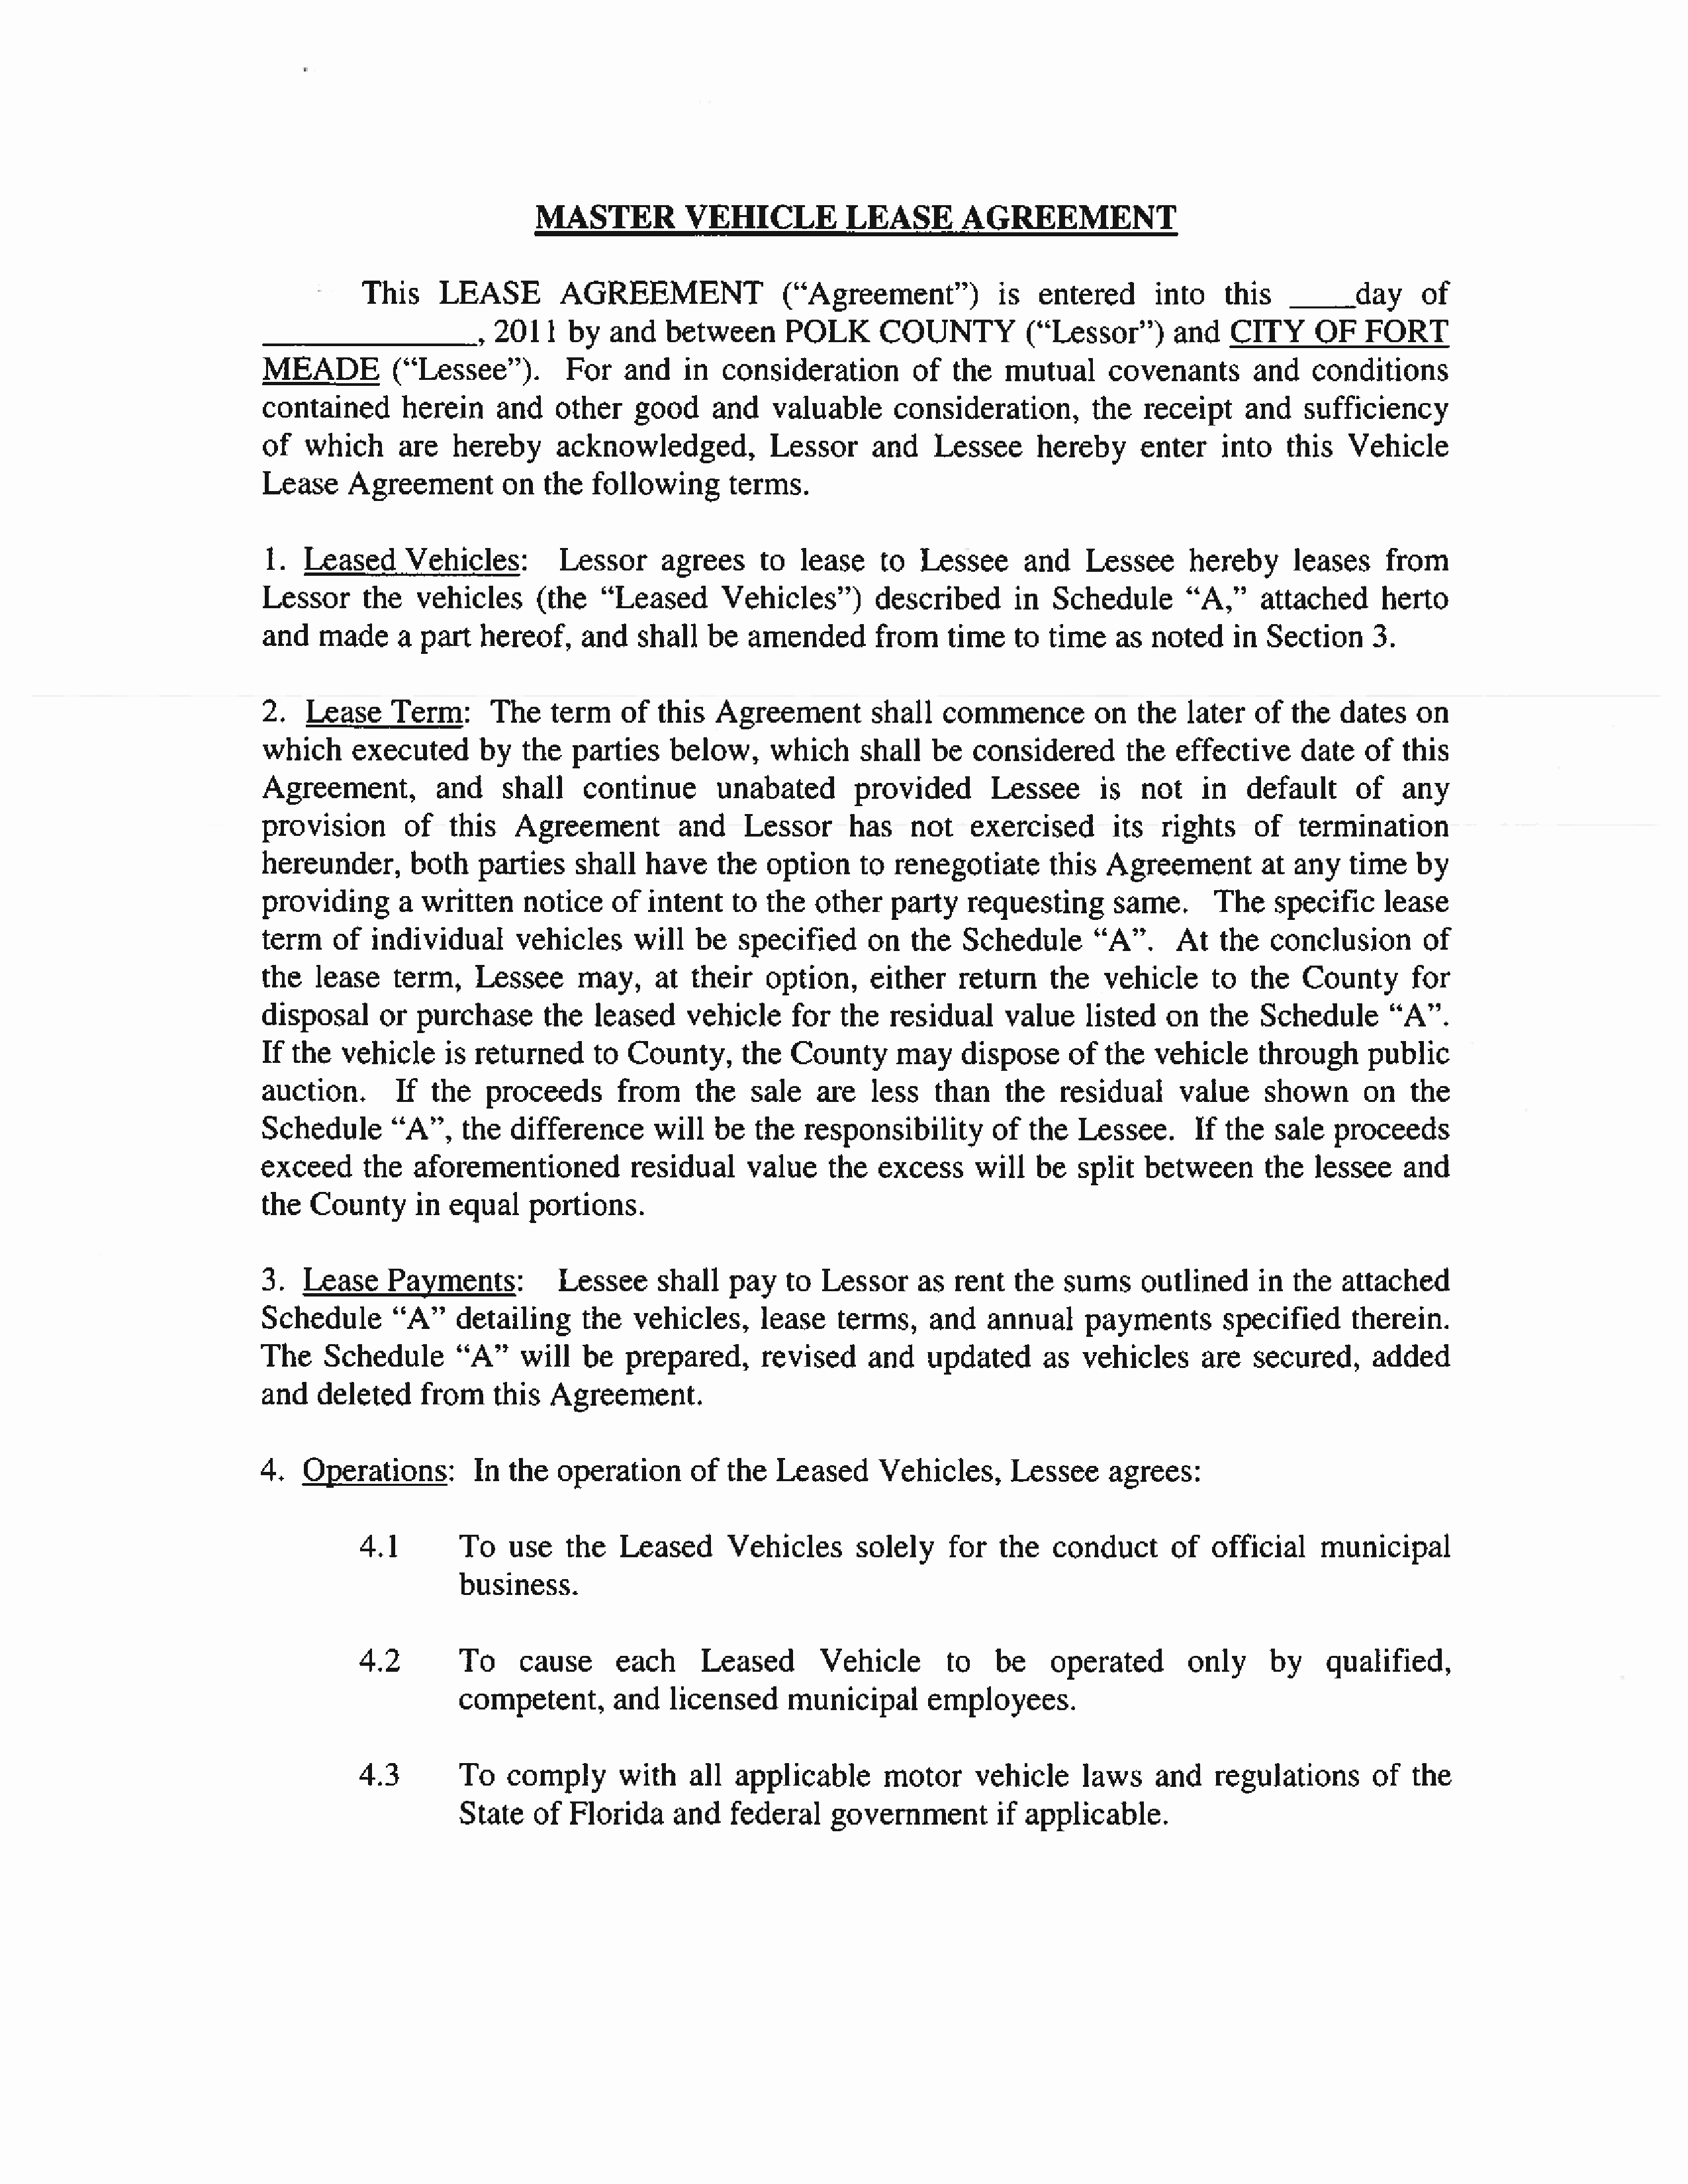 Car Lease Agreement Template Beautiful Master Vehicle Lease Agreement